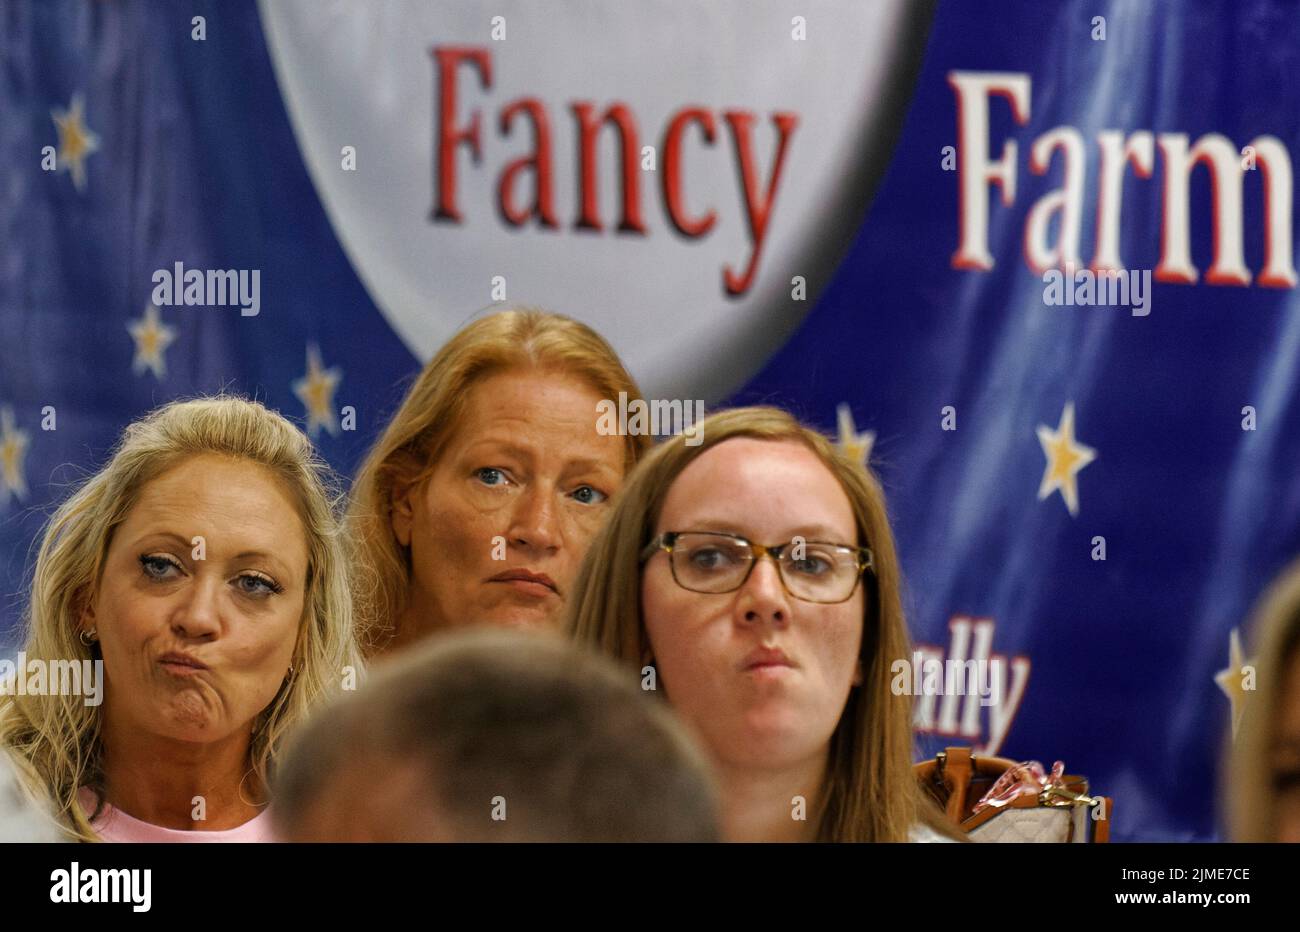 Calvert City, KY, USA. 05 Aug 2022. Two women grimace and one frowns while listening to Kelley Paul speak at the Night Before Fancy Farm West Kentucky GOP Rally at the Calvert City Civic Center. The keynote address was originally scheduled to be delivered by her husband, Sen. Rand Paul, who had to stay in Washington due to a Senate vote being scheduled for Aug. 6. (Credit: Billy Suratt/Apex MediaWire via Alamy Live News) Stock Photo